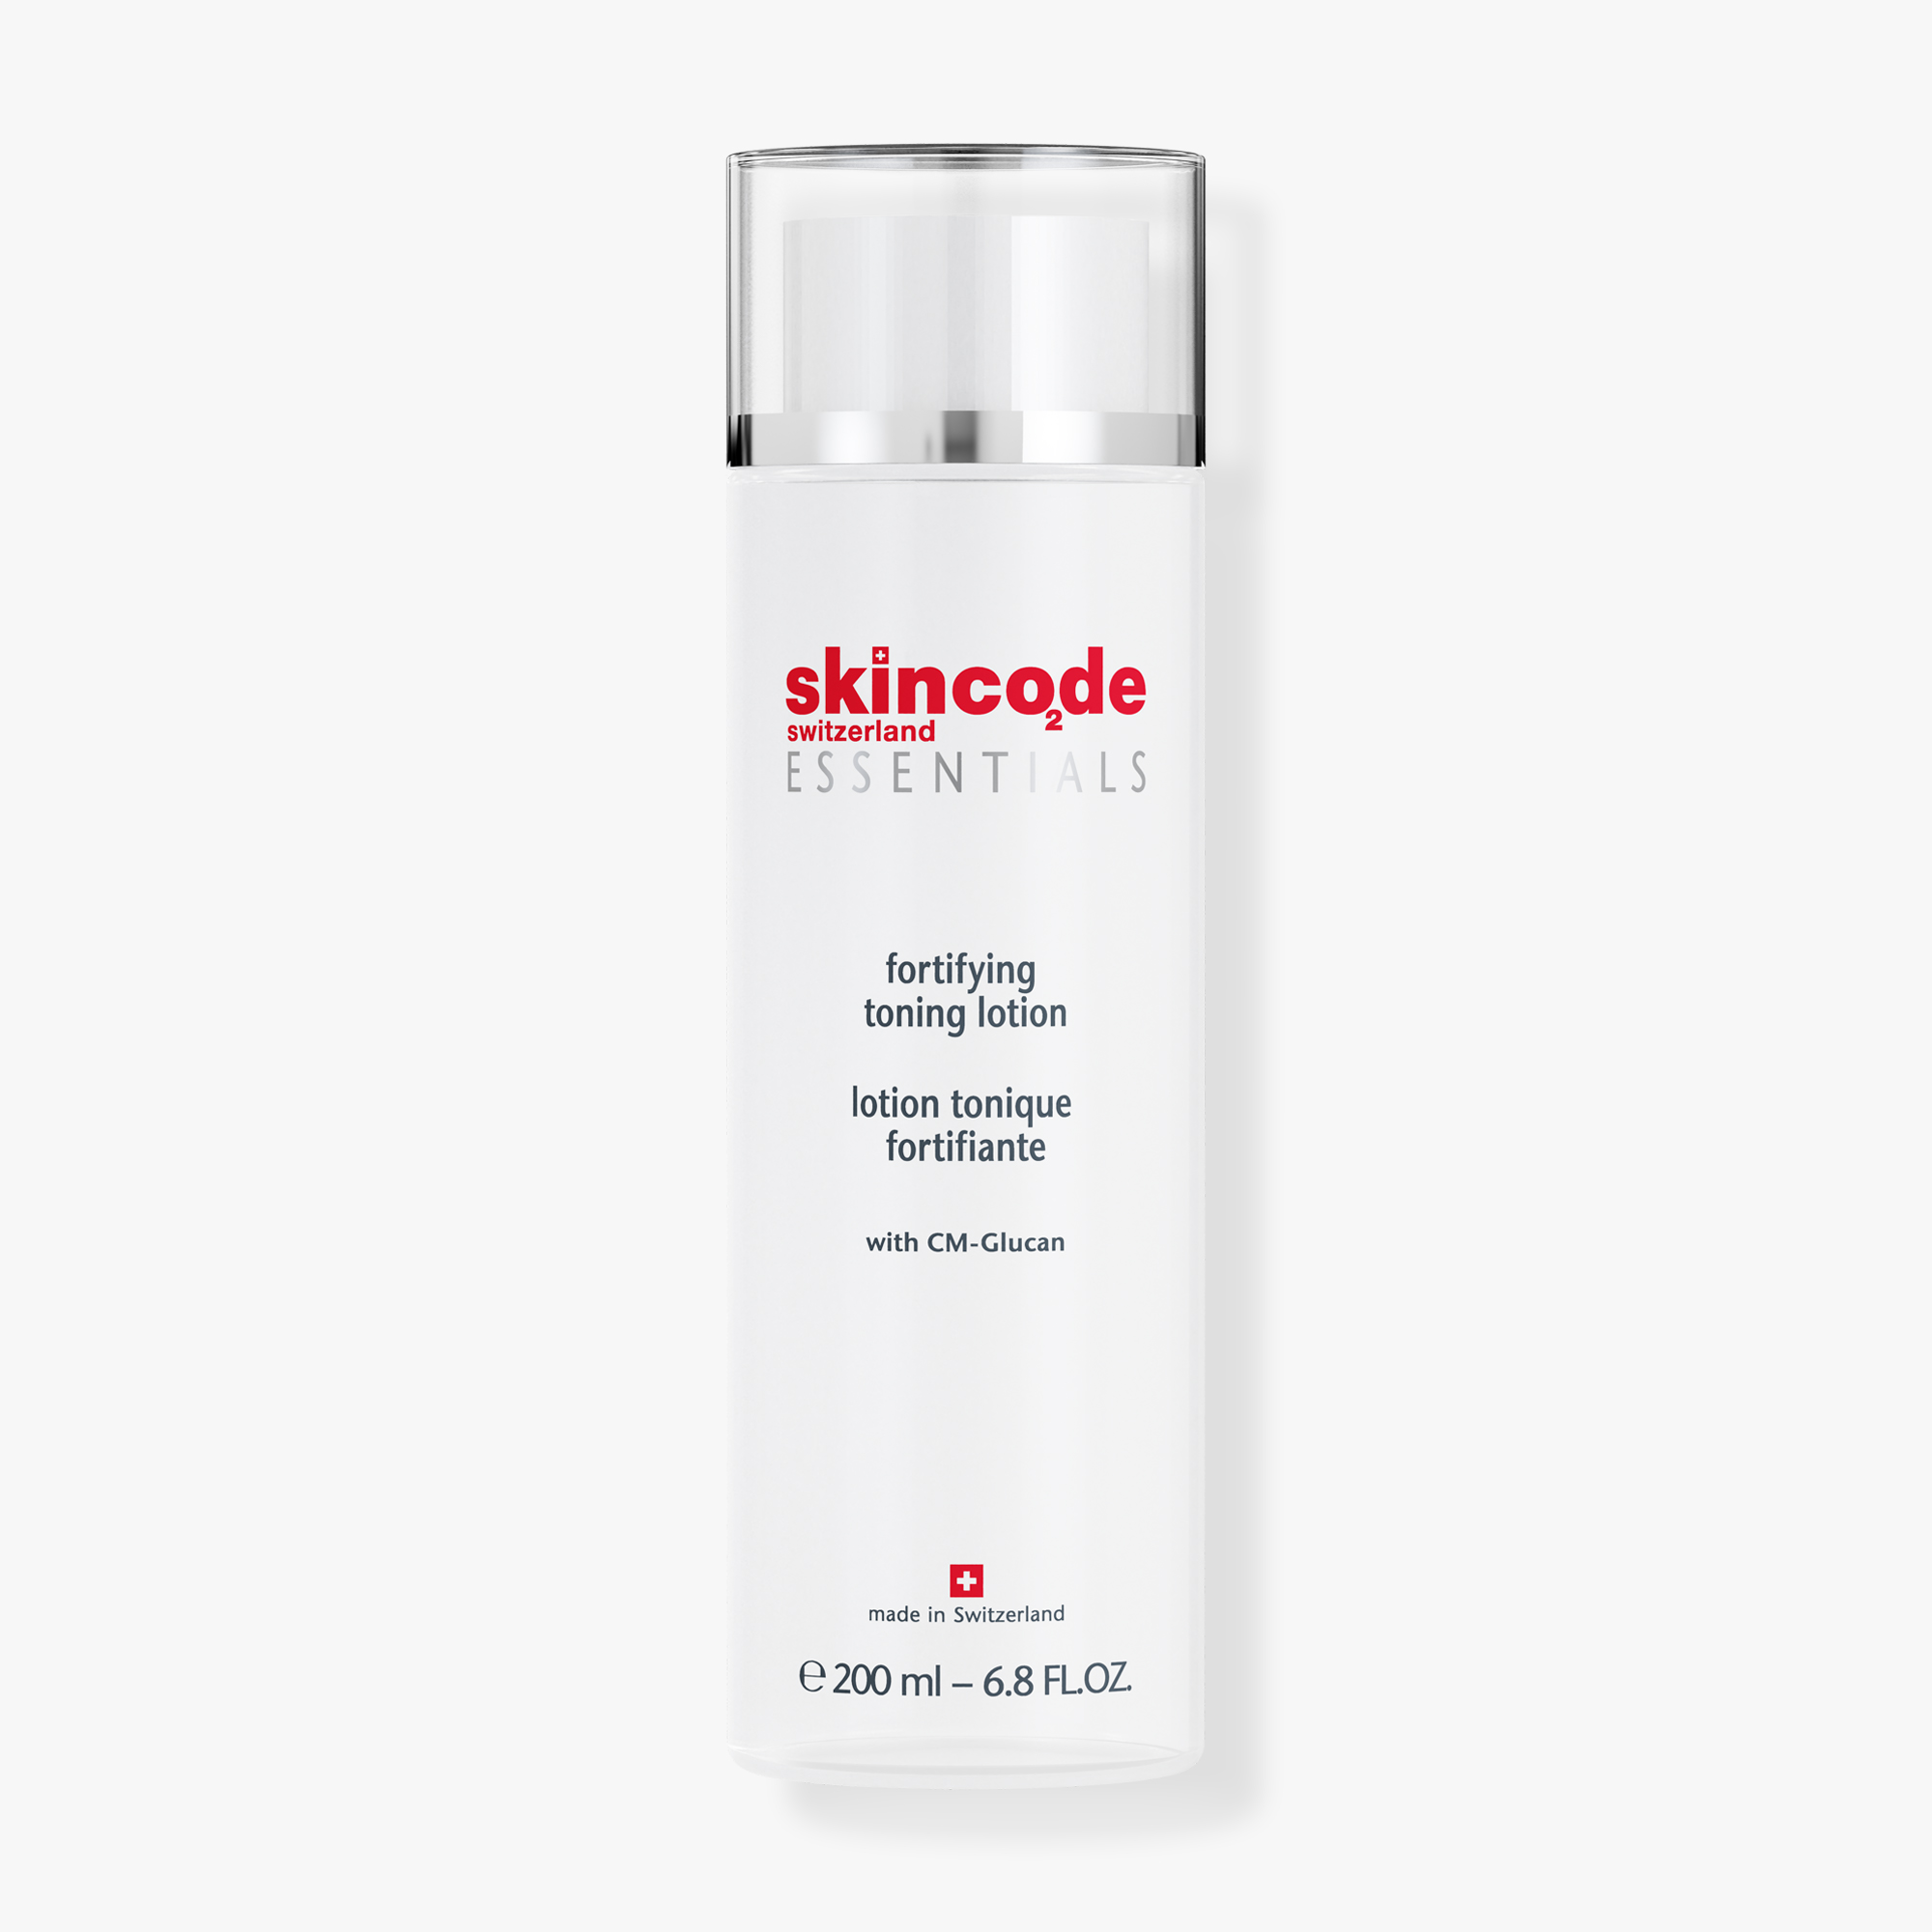 Skincode Essentials Fortifying Toning Lotion, 200ml